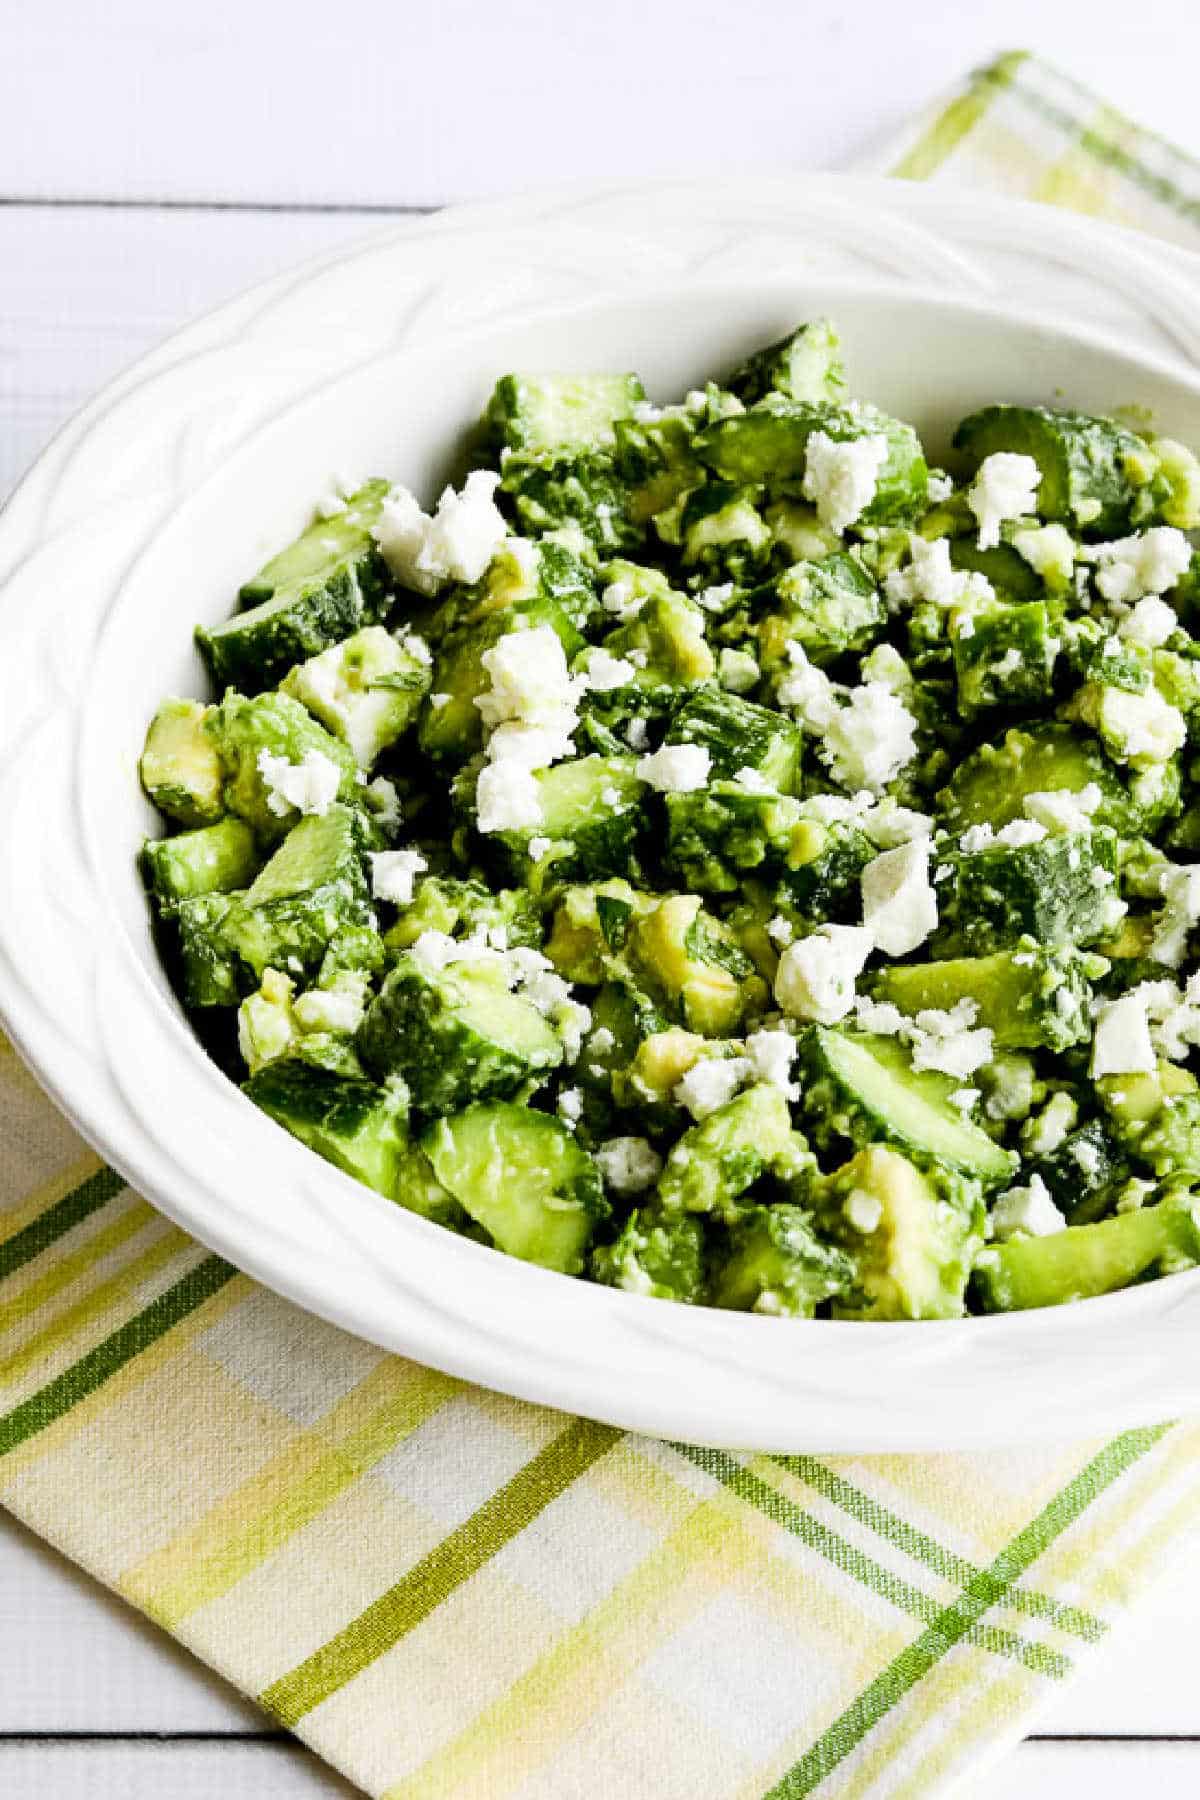 Cucumber Salad with Avocado and Feta shown in serving bowl